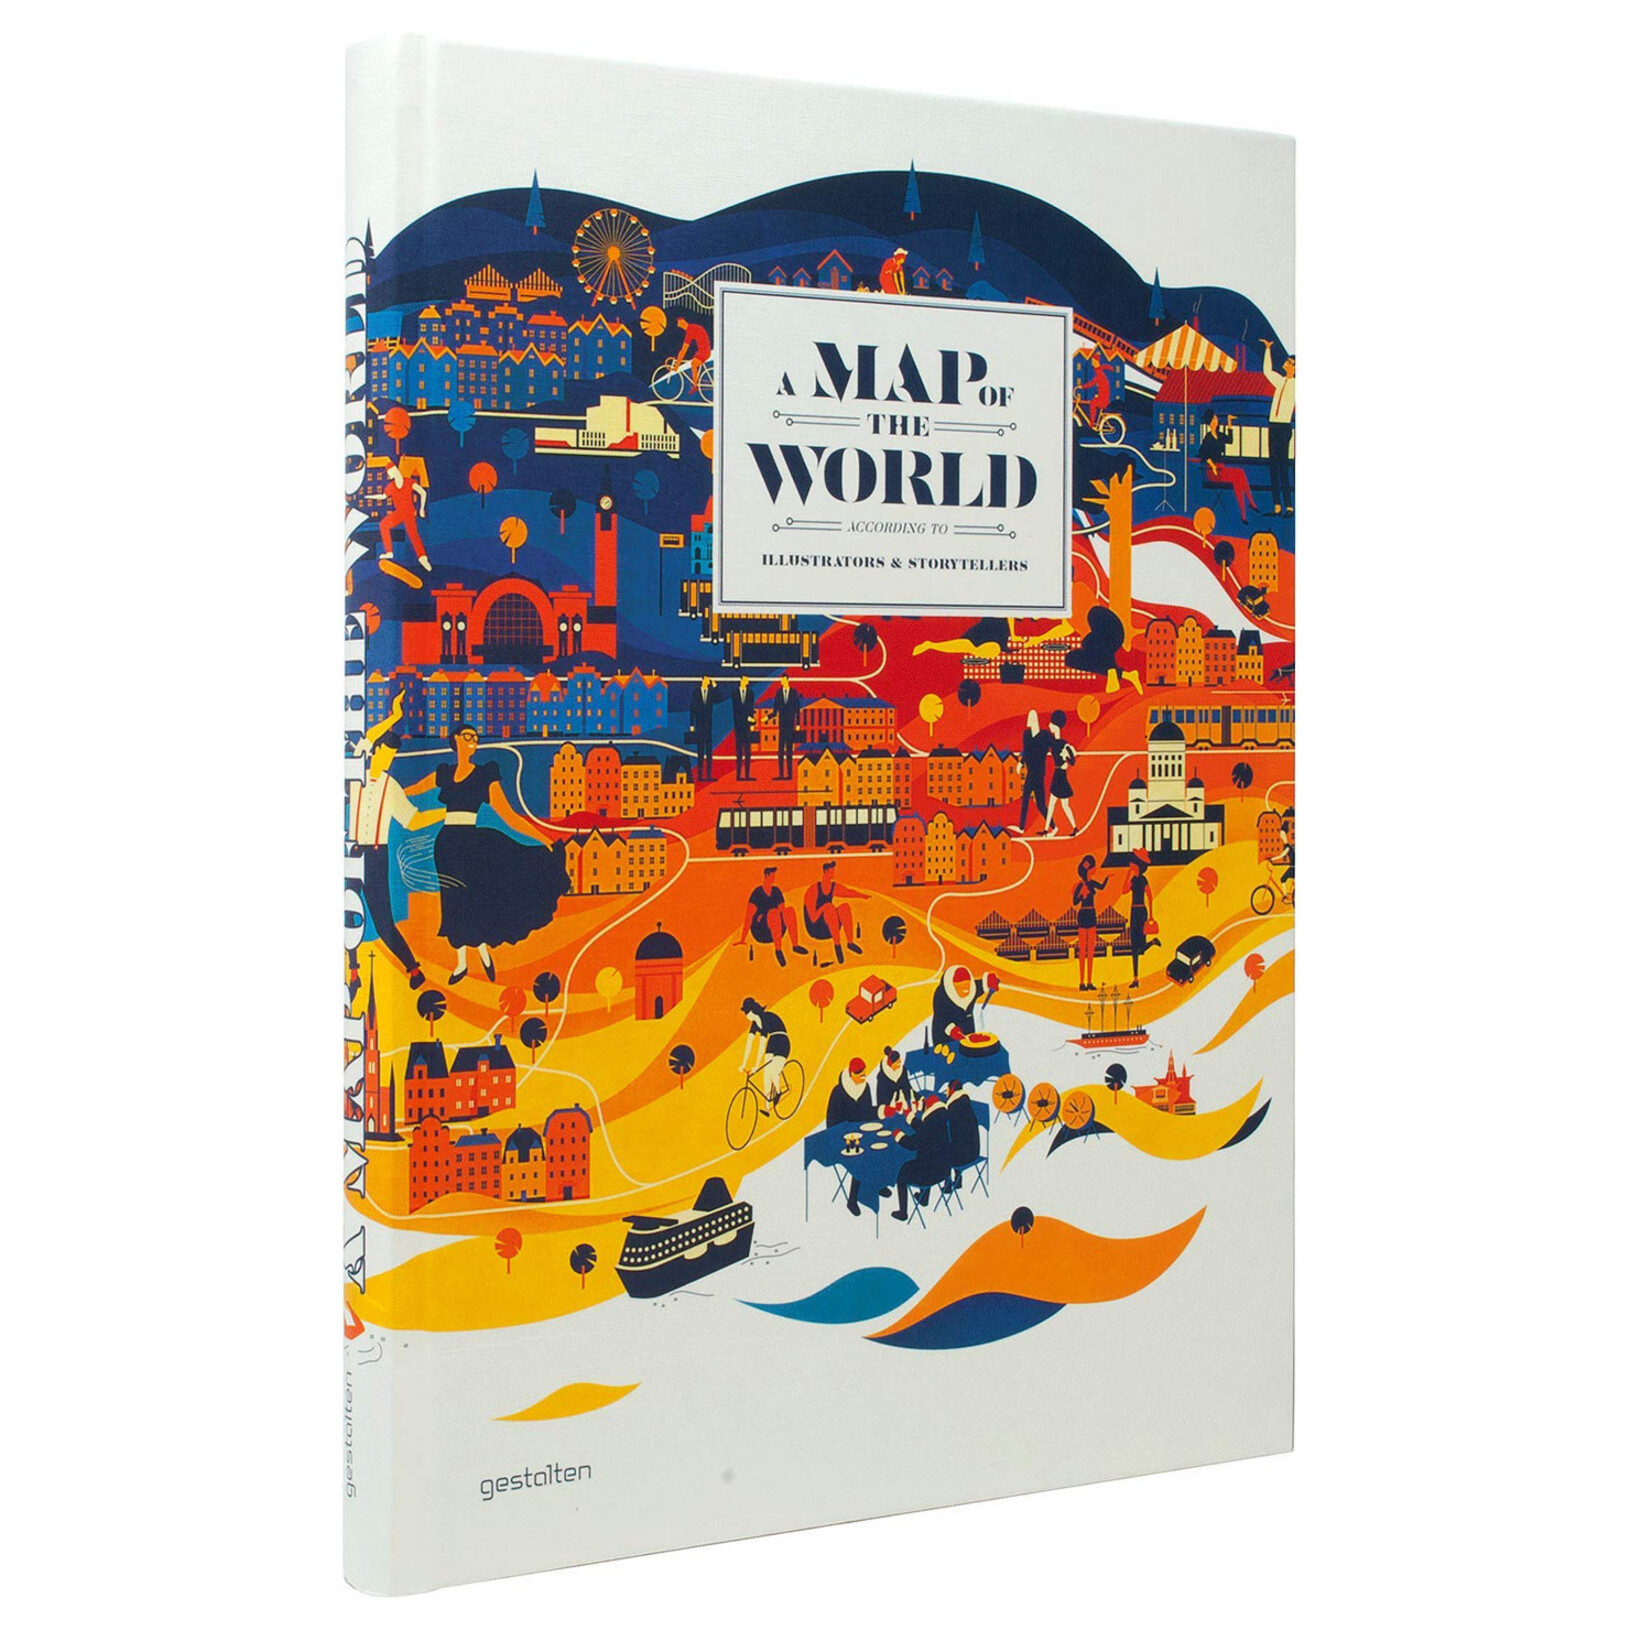 Map of the World According to Illustrators and Storytellers